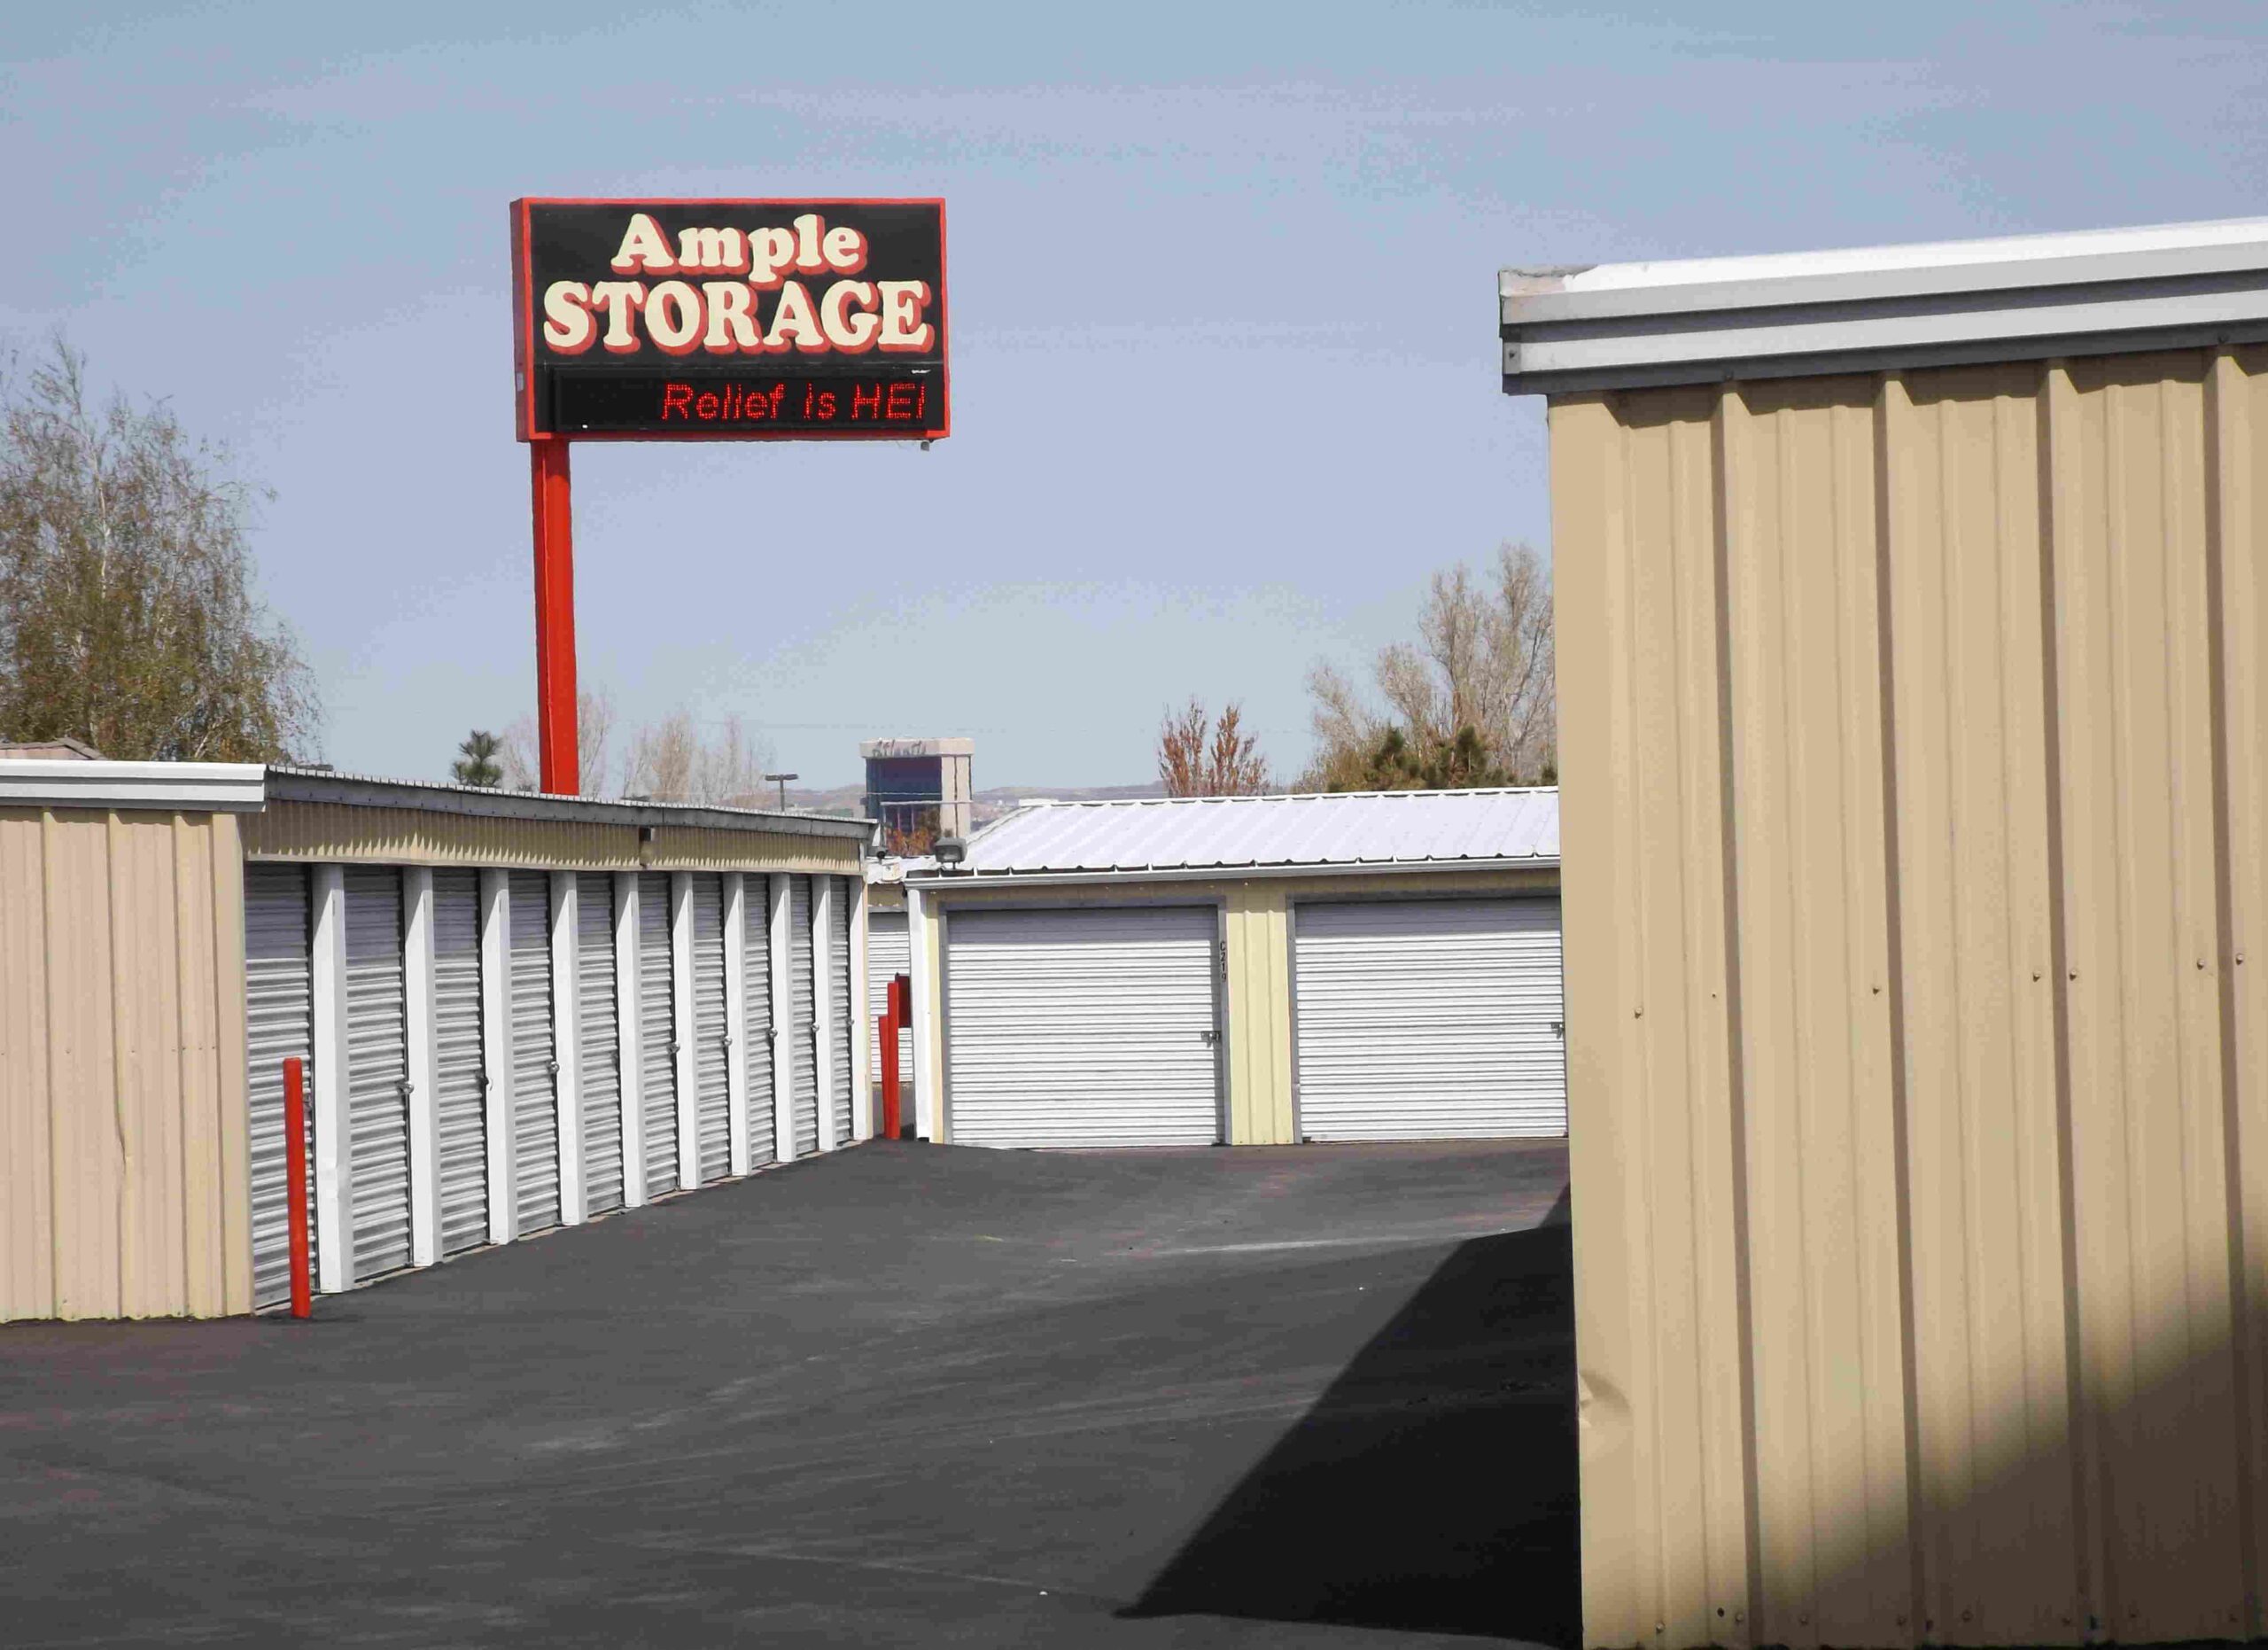 Ample's sign for cheap self storage.